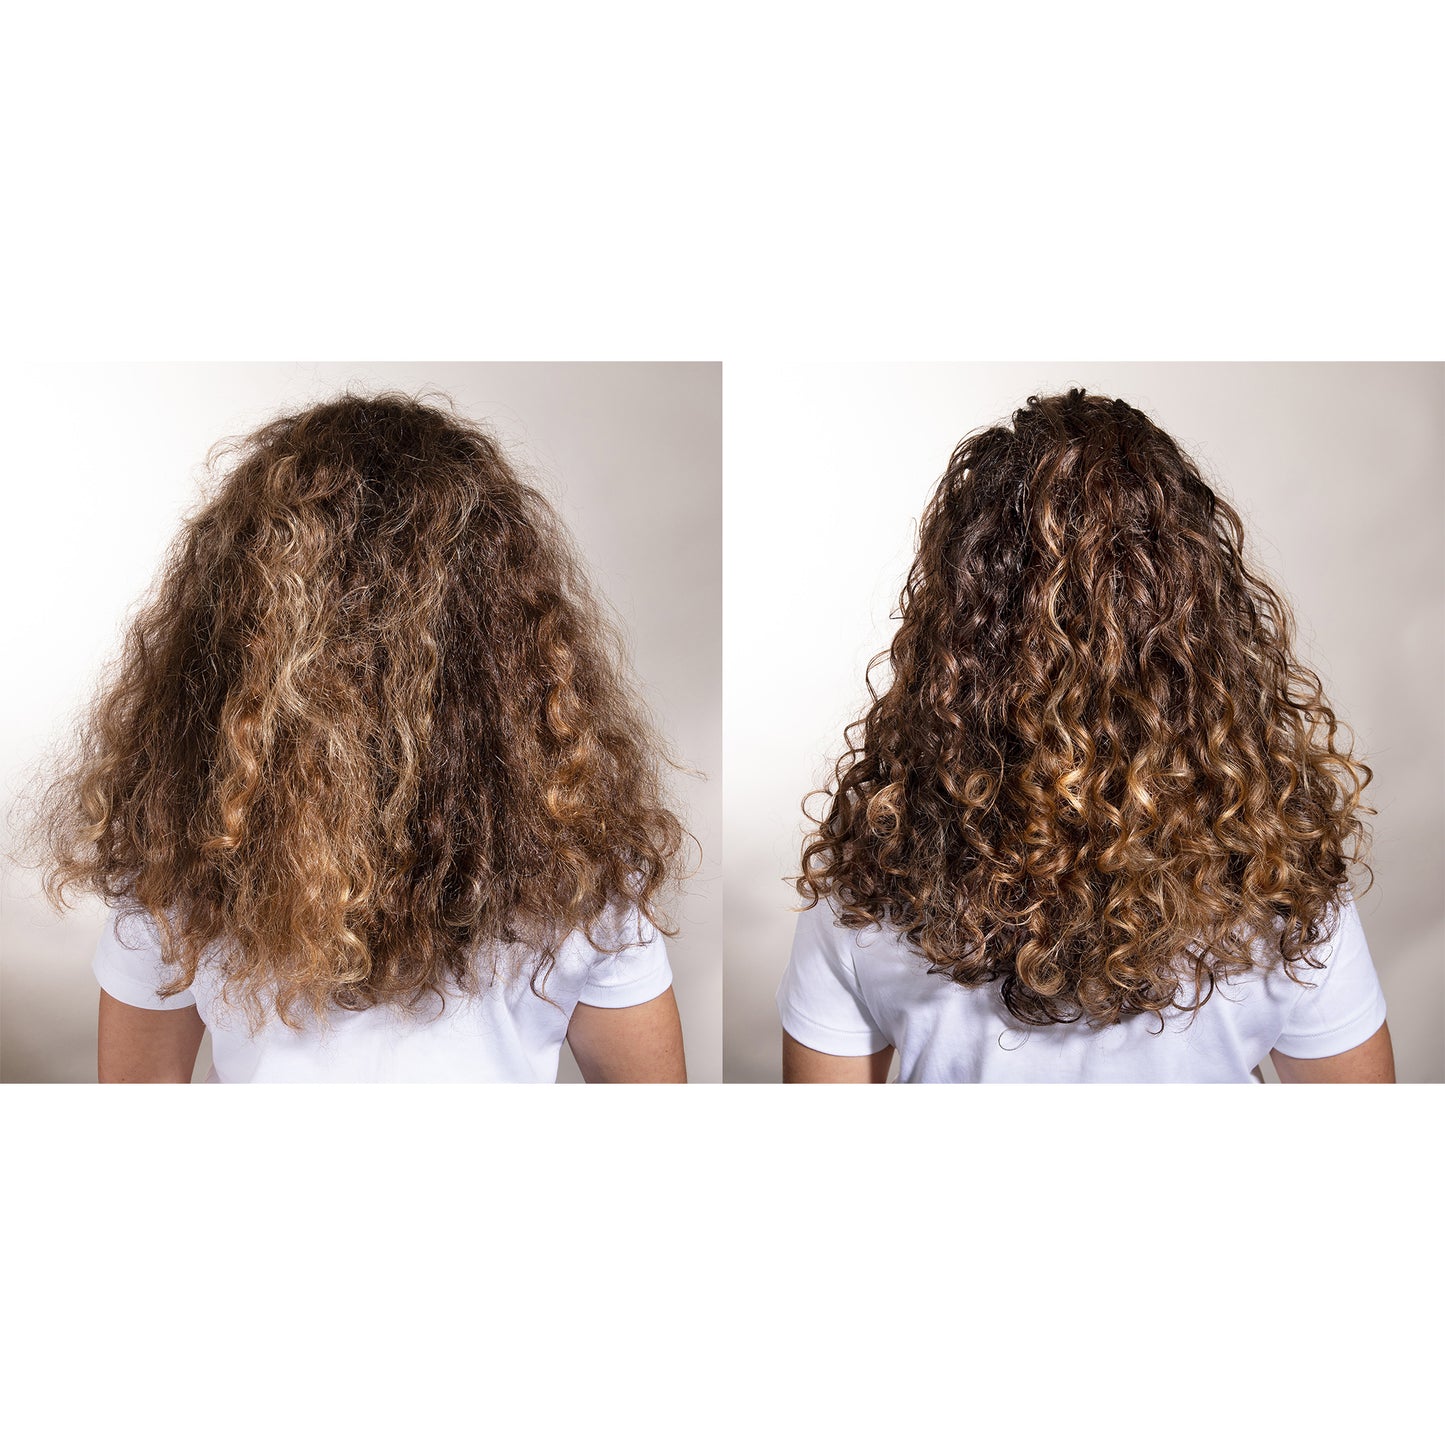 CURL LEAVE-IN BUTTER Enhances | Nourishes | Shines